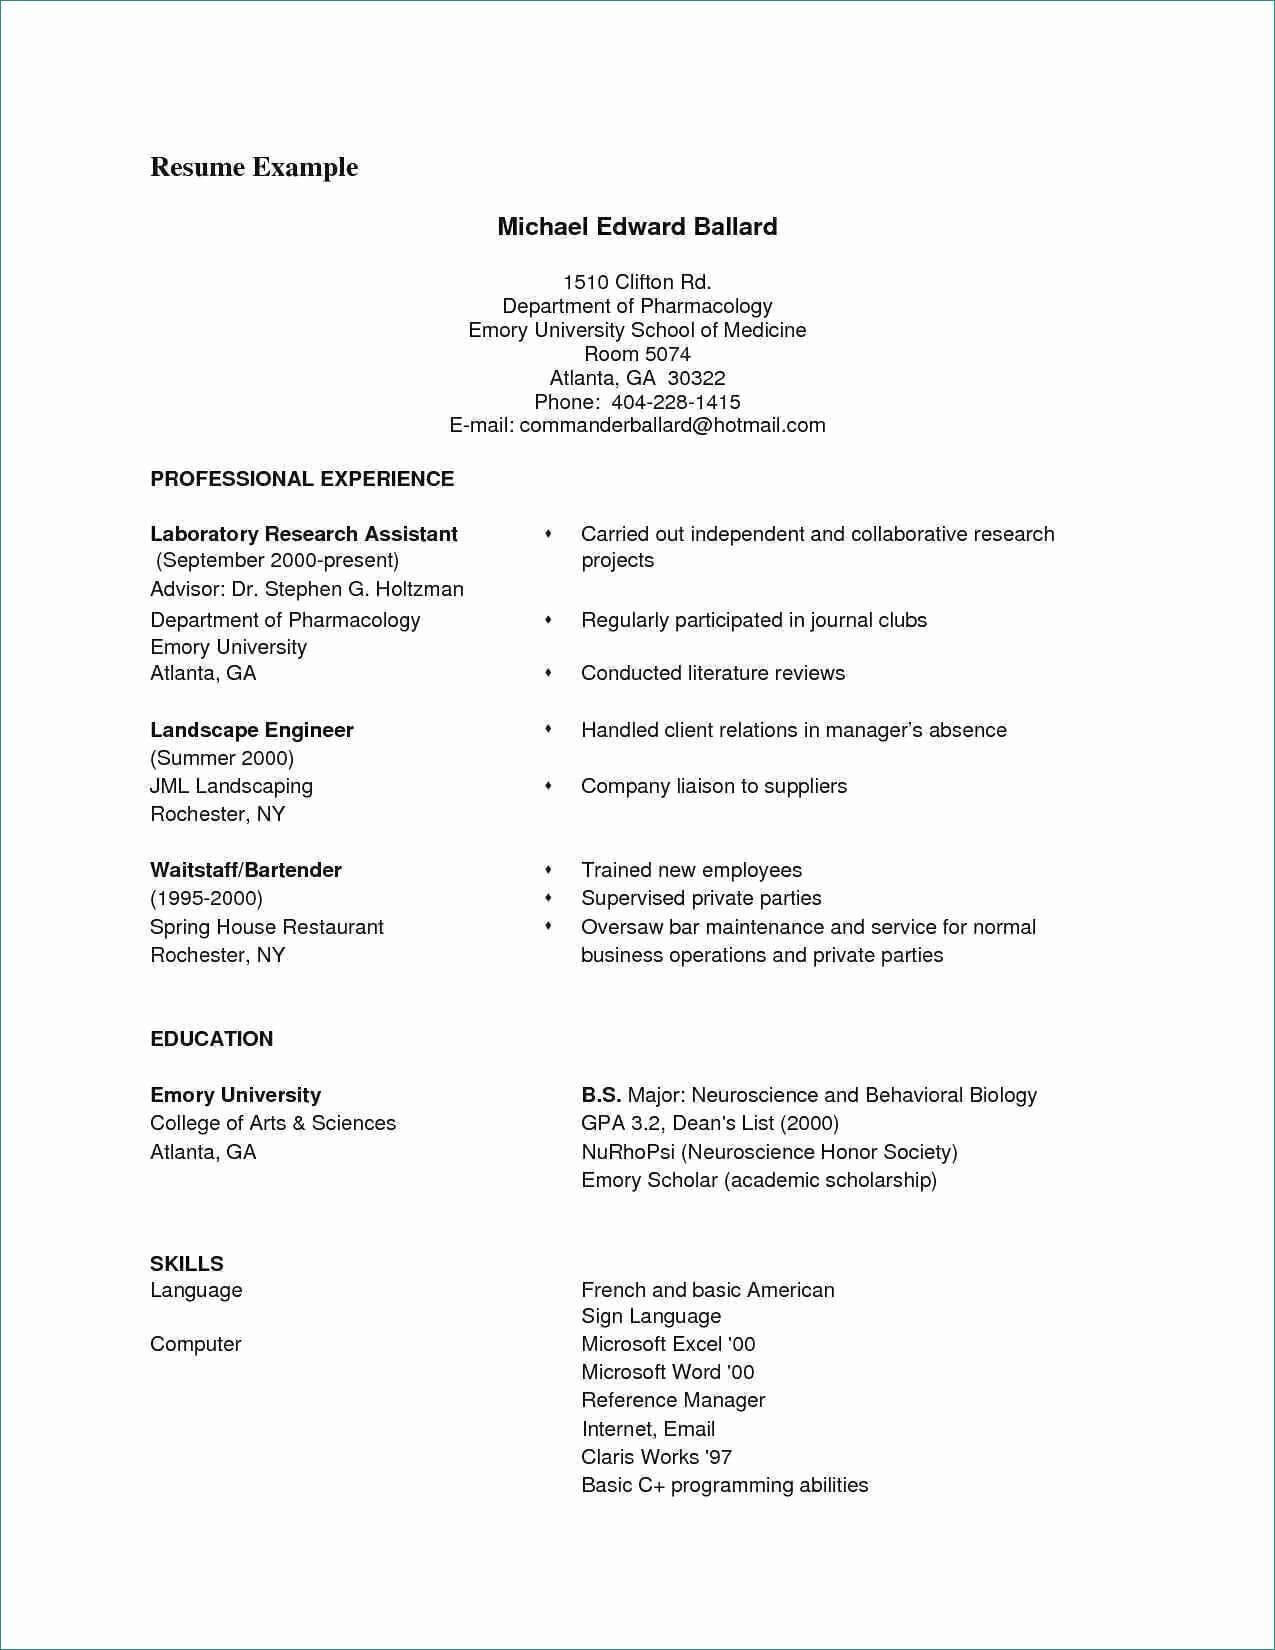 Free Blank Resume Templates For Microsoft Word – Yatay For Free Blank Resume Templates For Microsoft Word